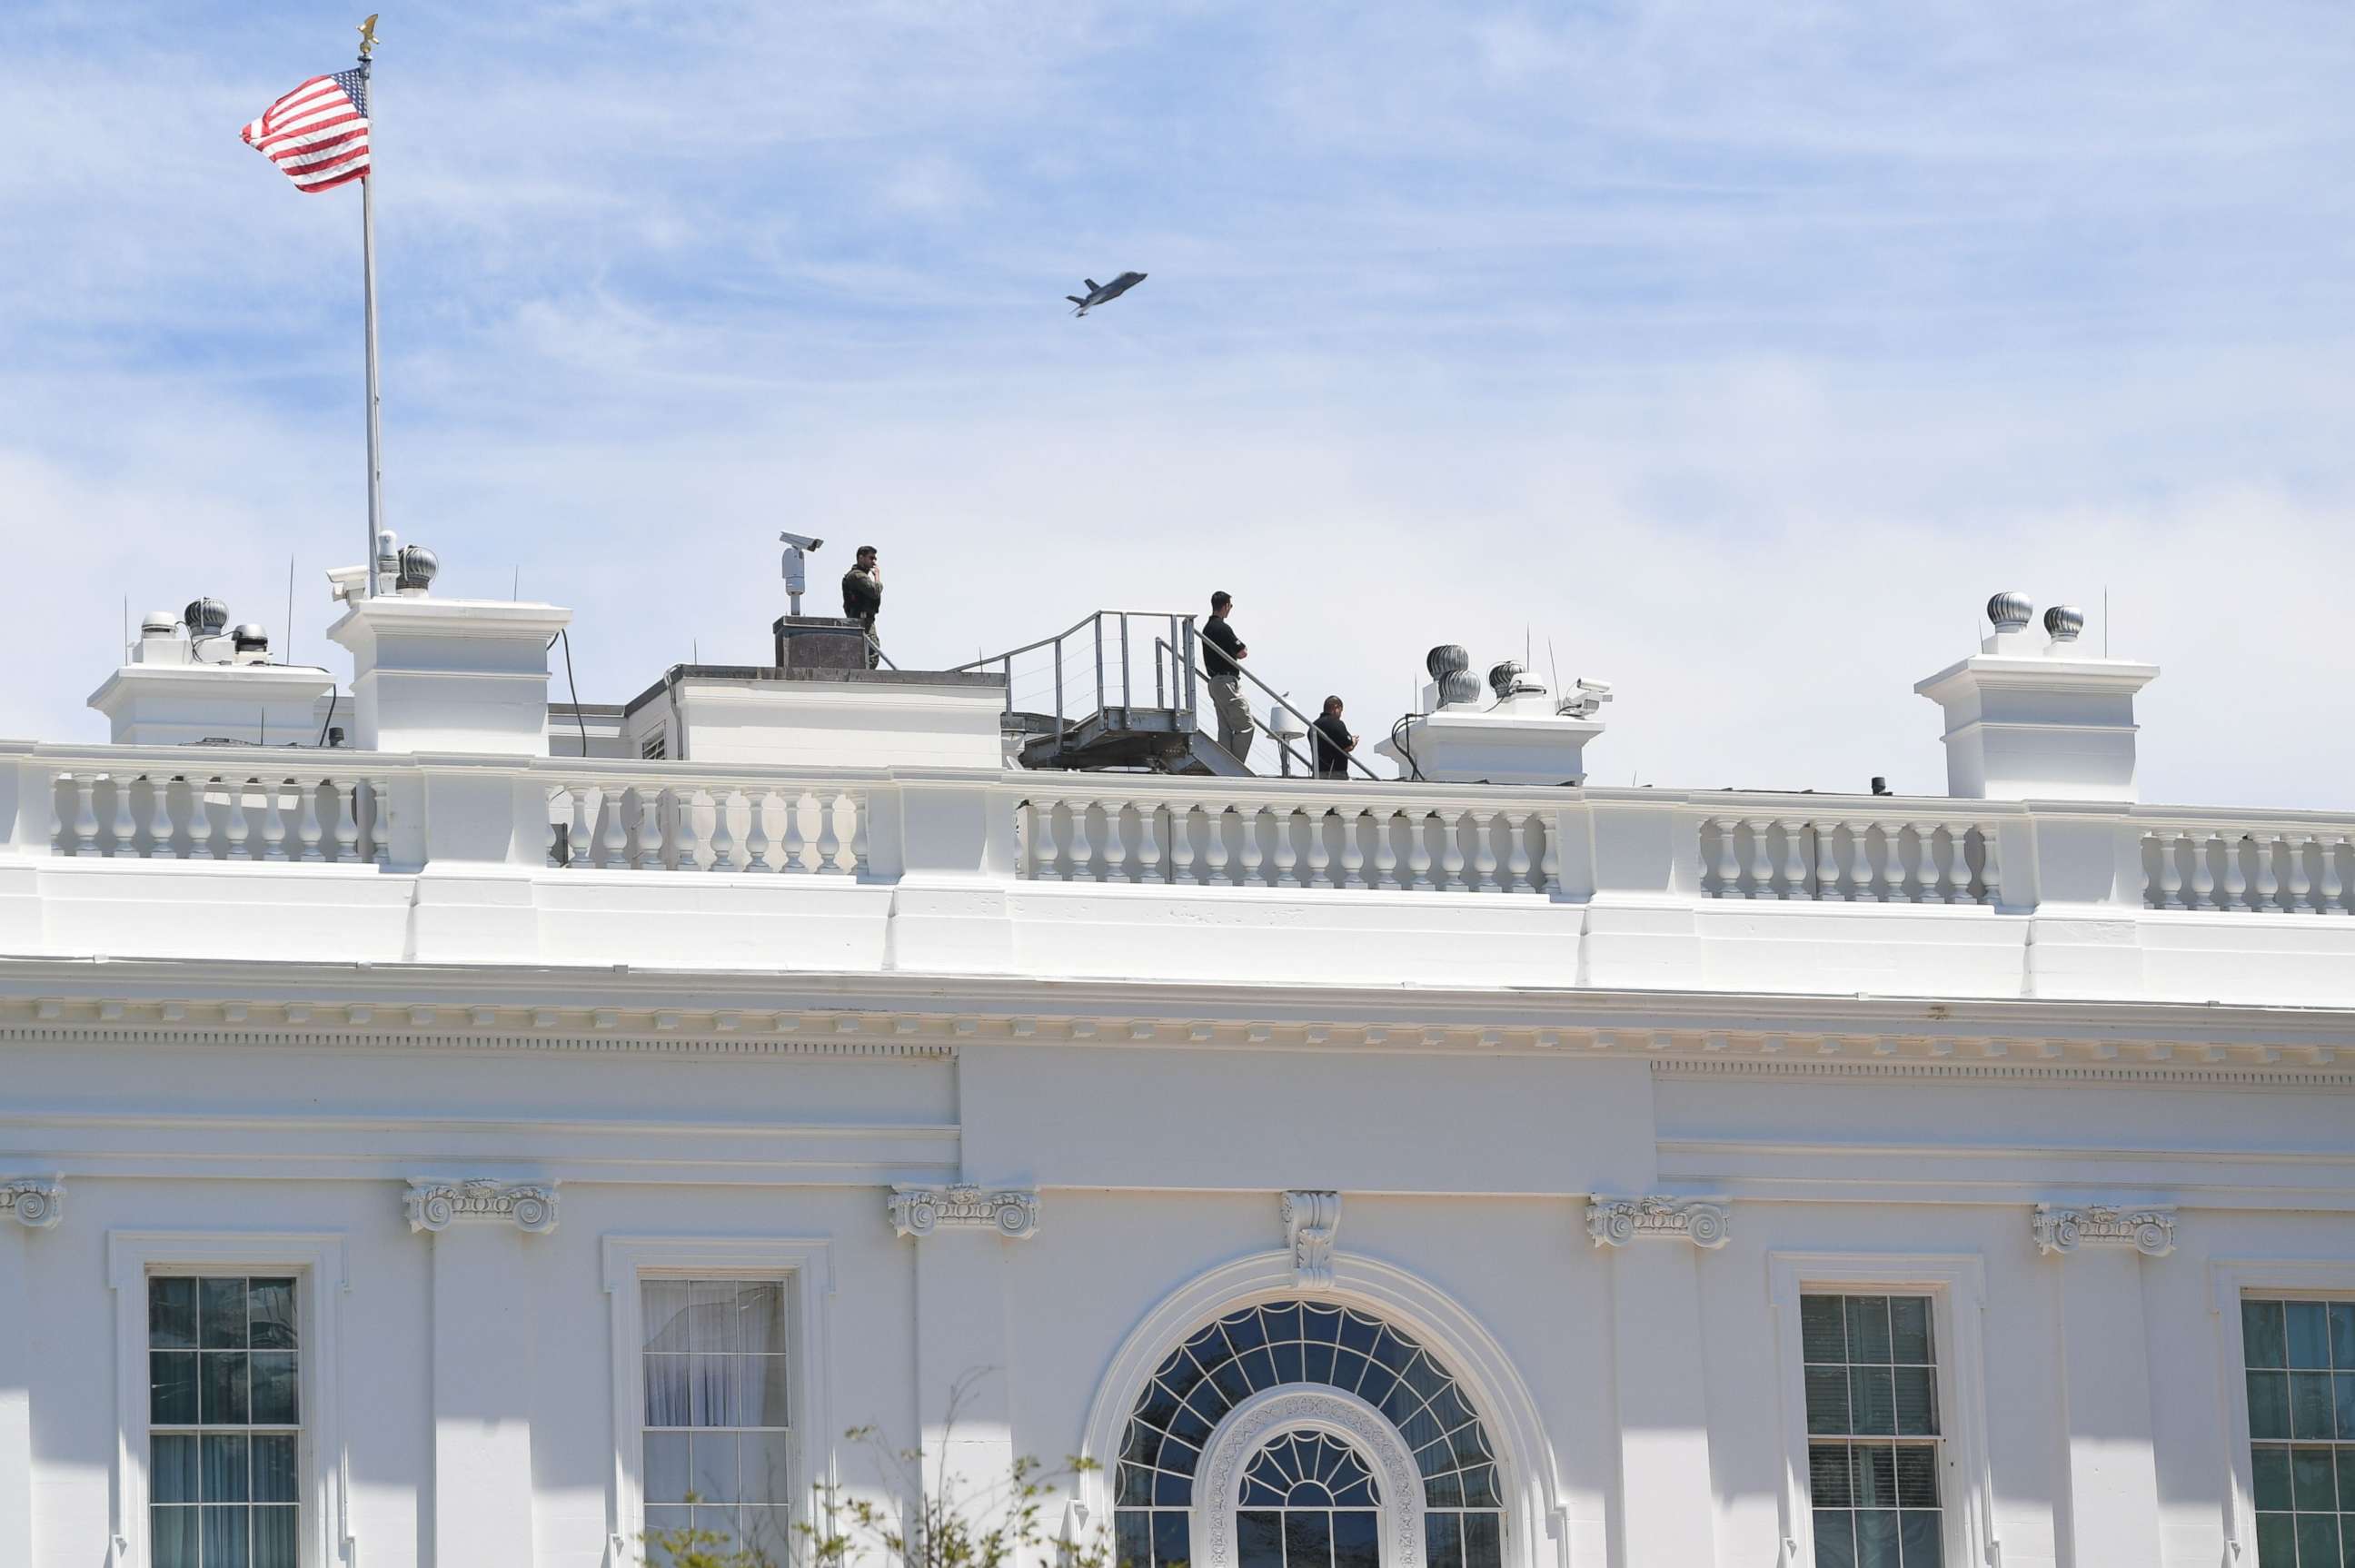 PHOTO: Security watch as a F-35 fighter plane flies over the White House on June 12, 2019, in Washington.